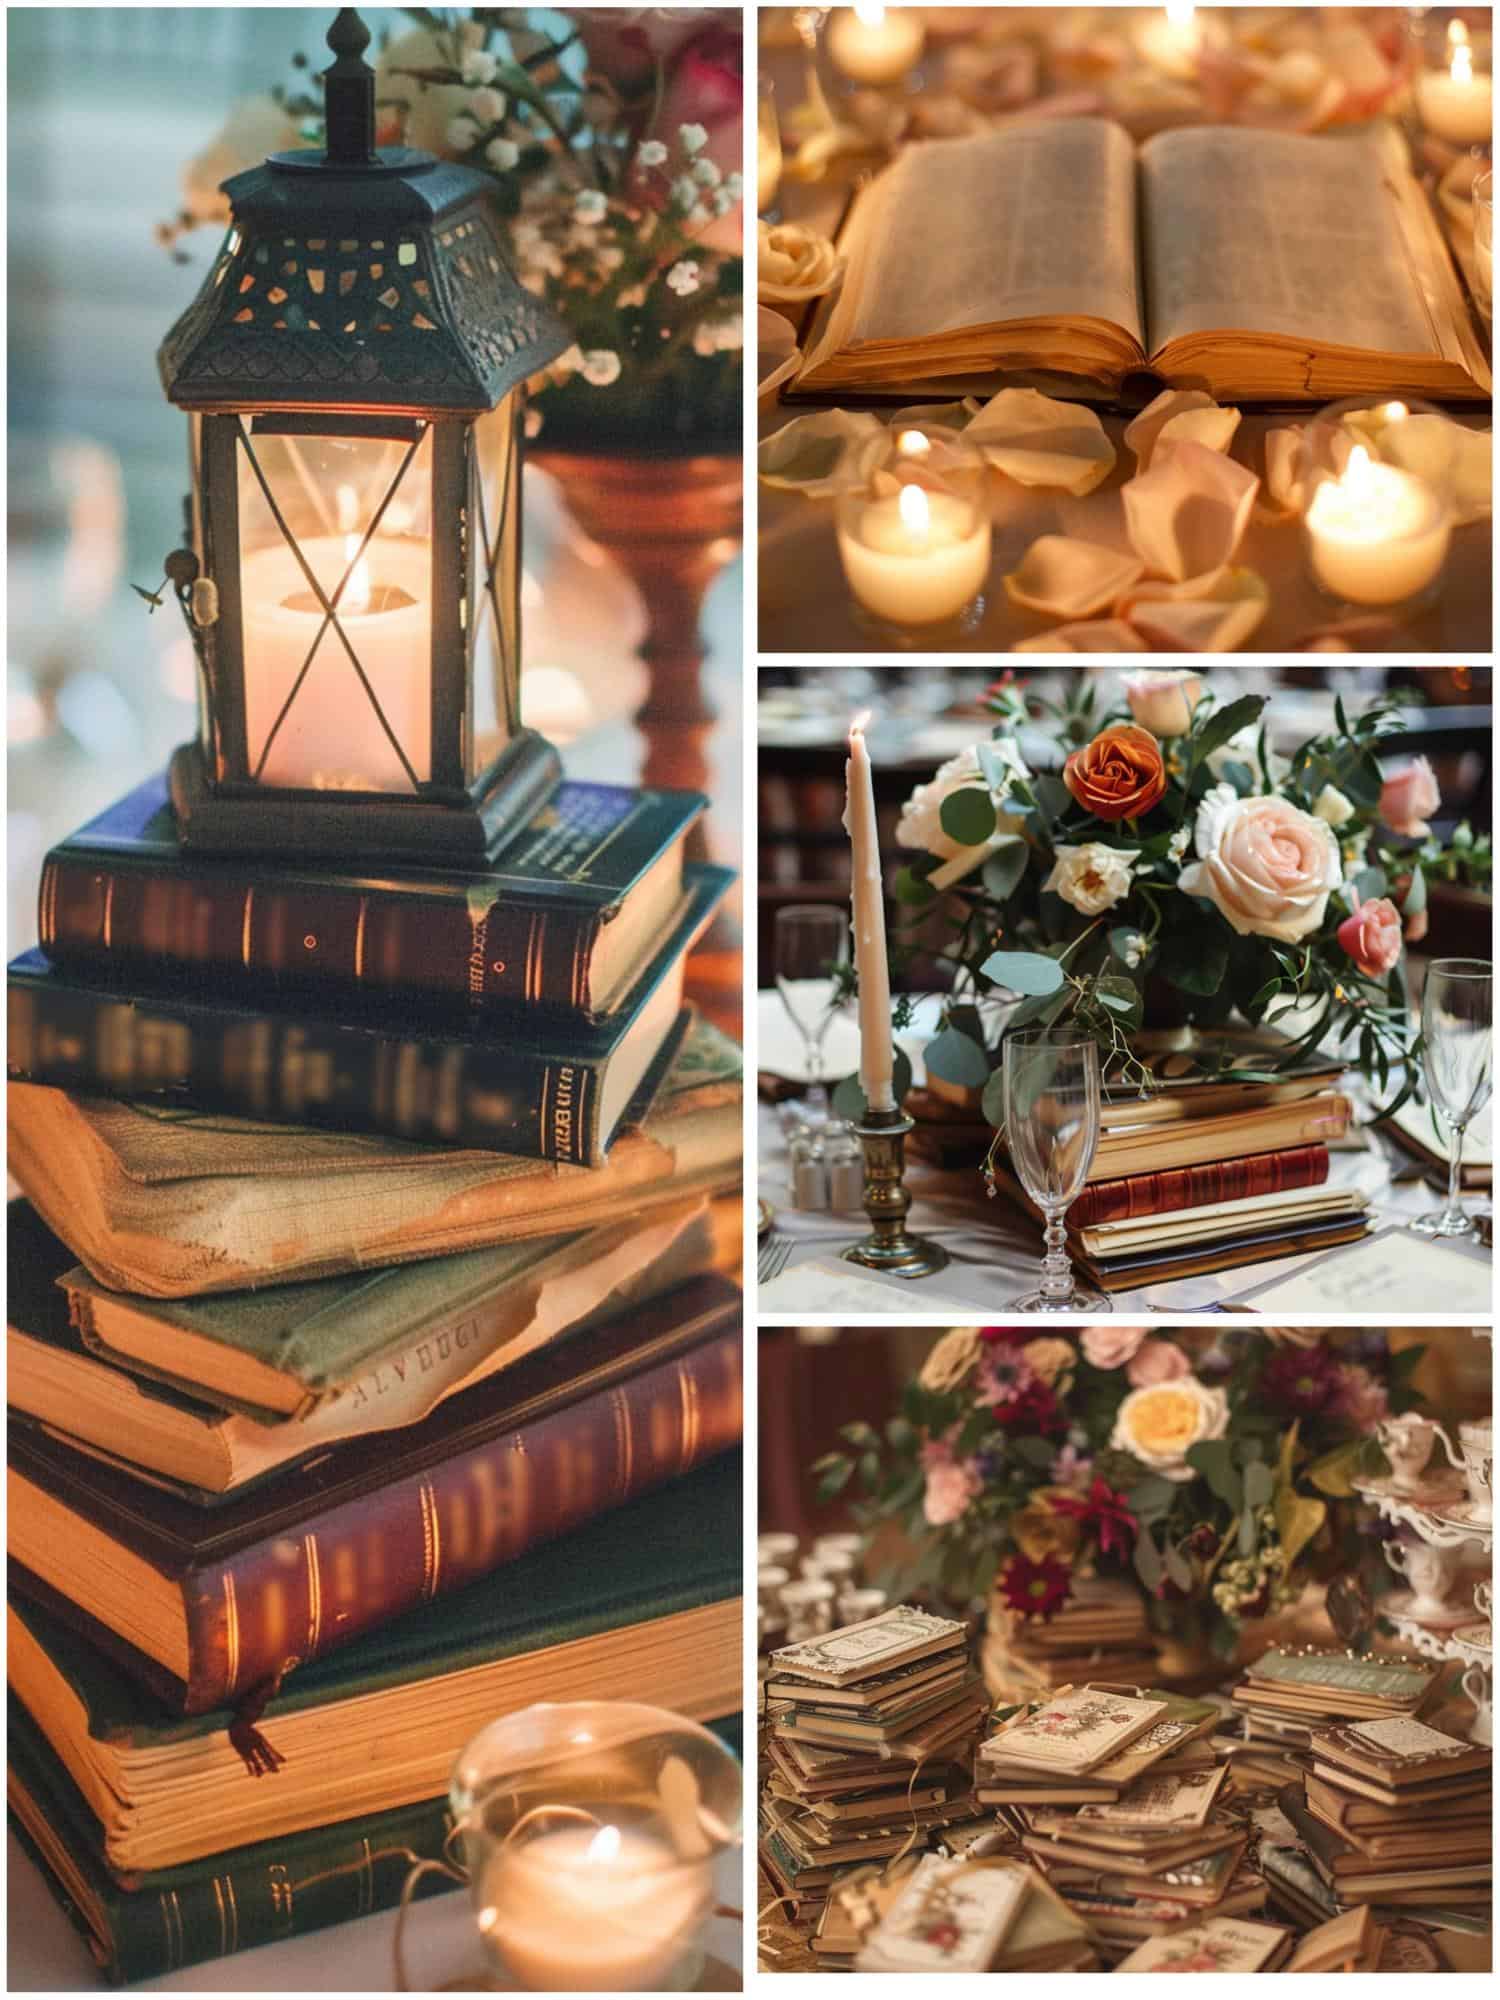 books used as centerpieces and decor